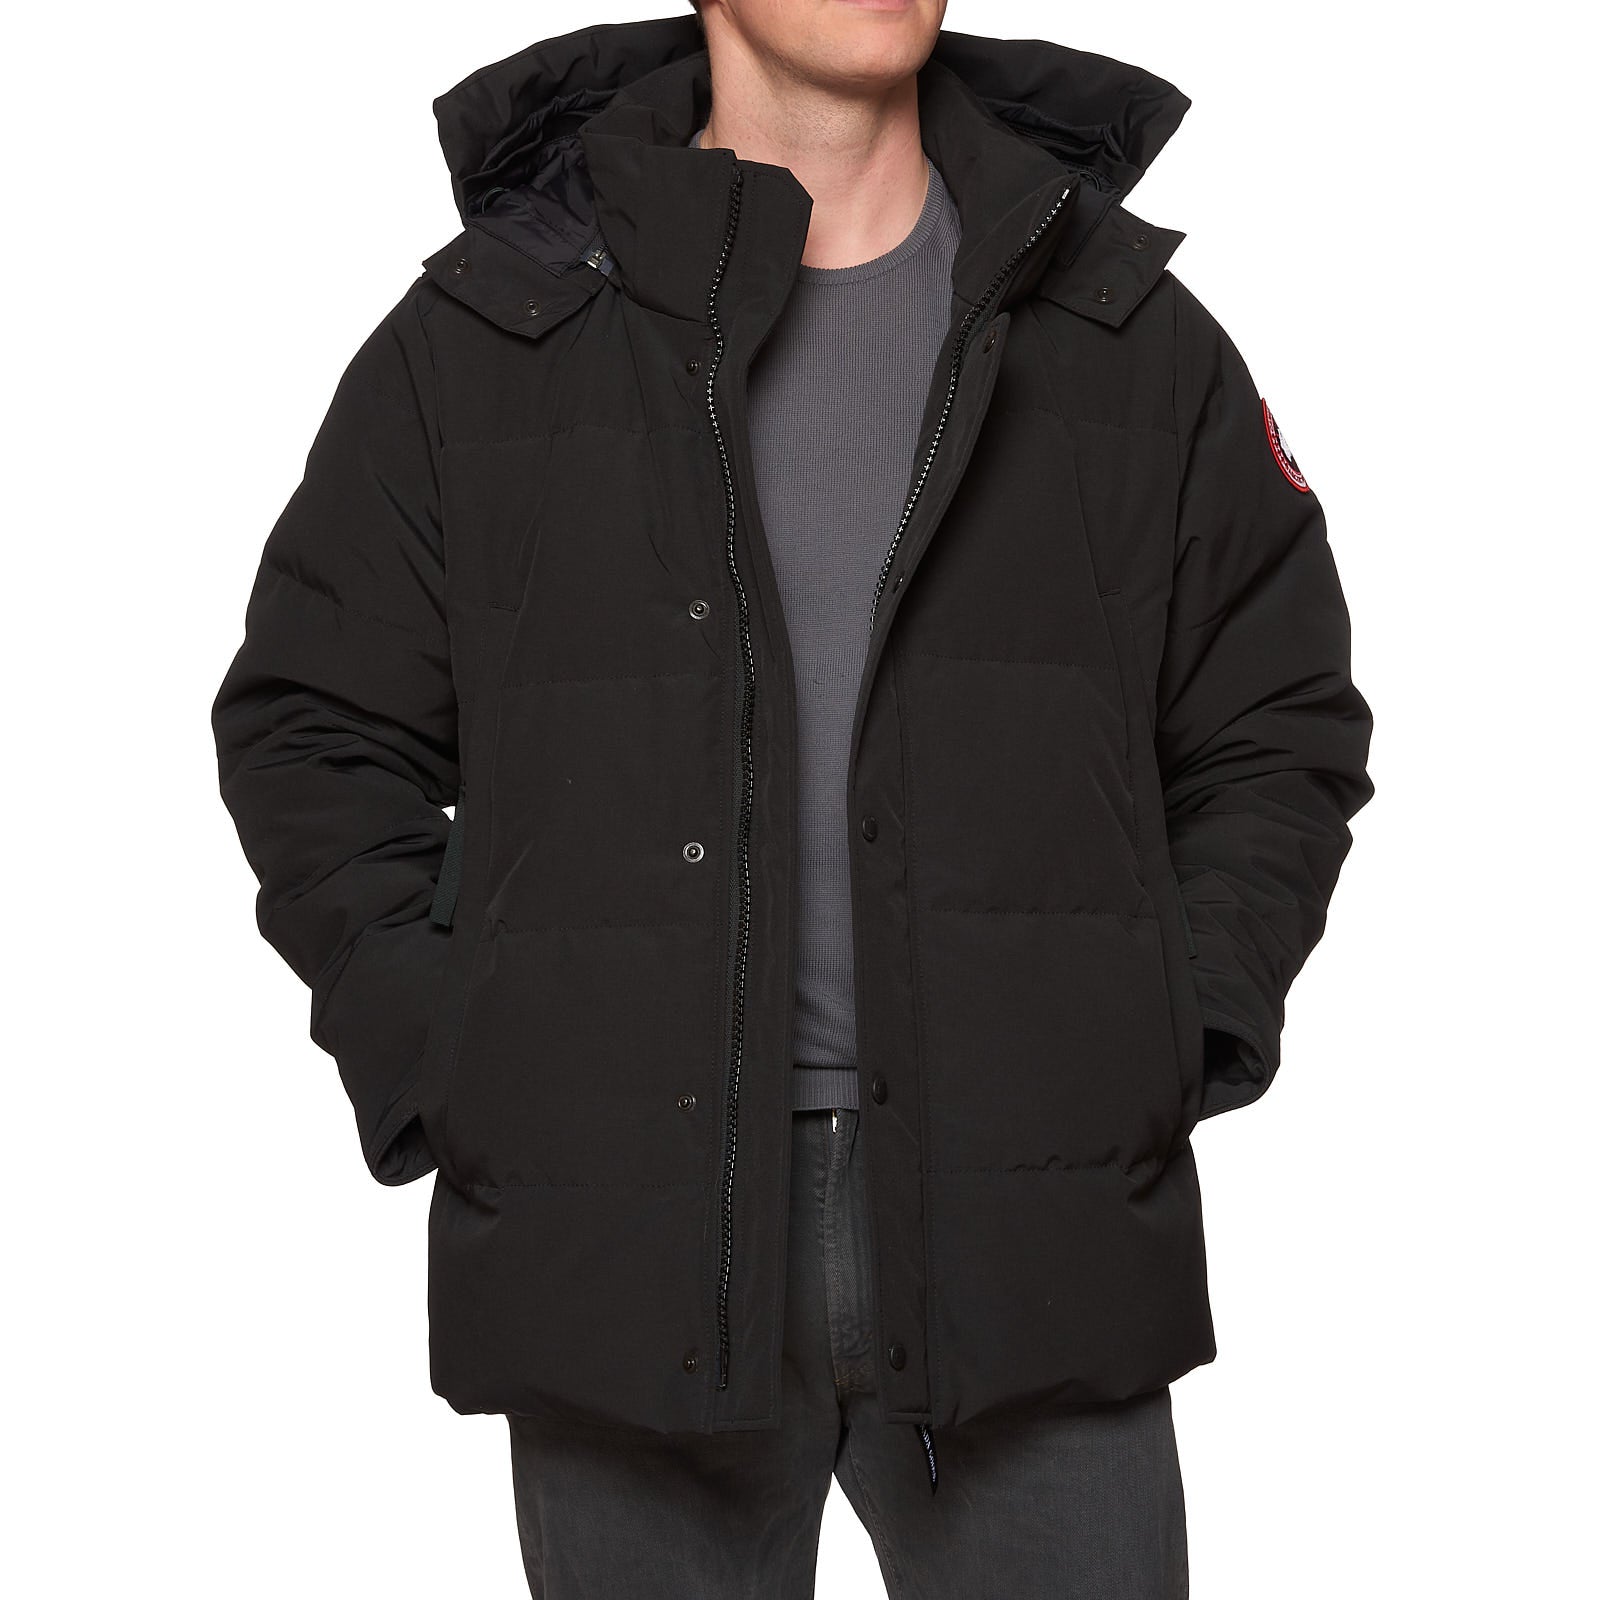 Expedition down parka in black - Canada Goose